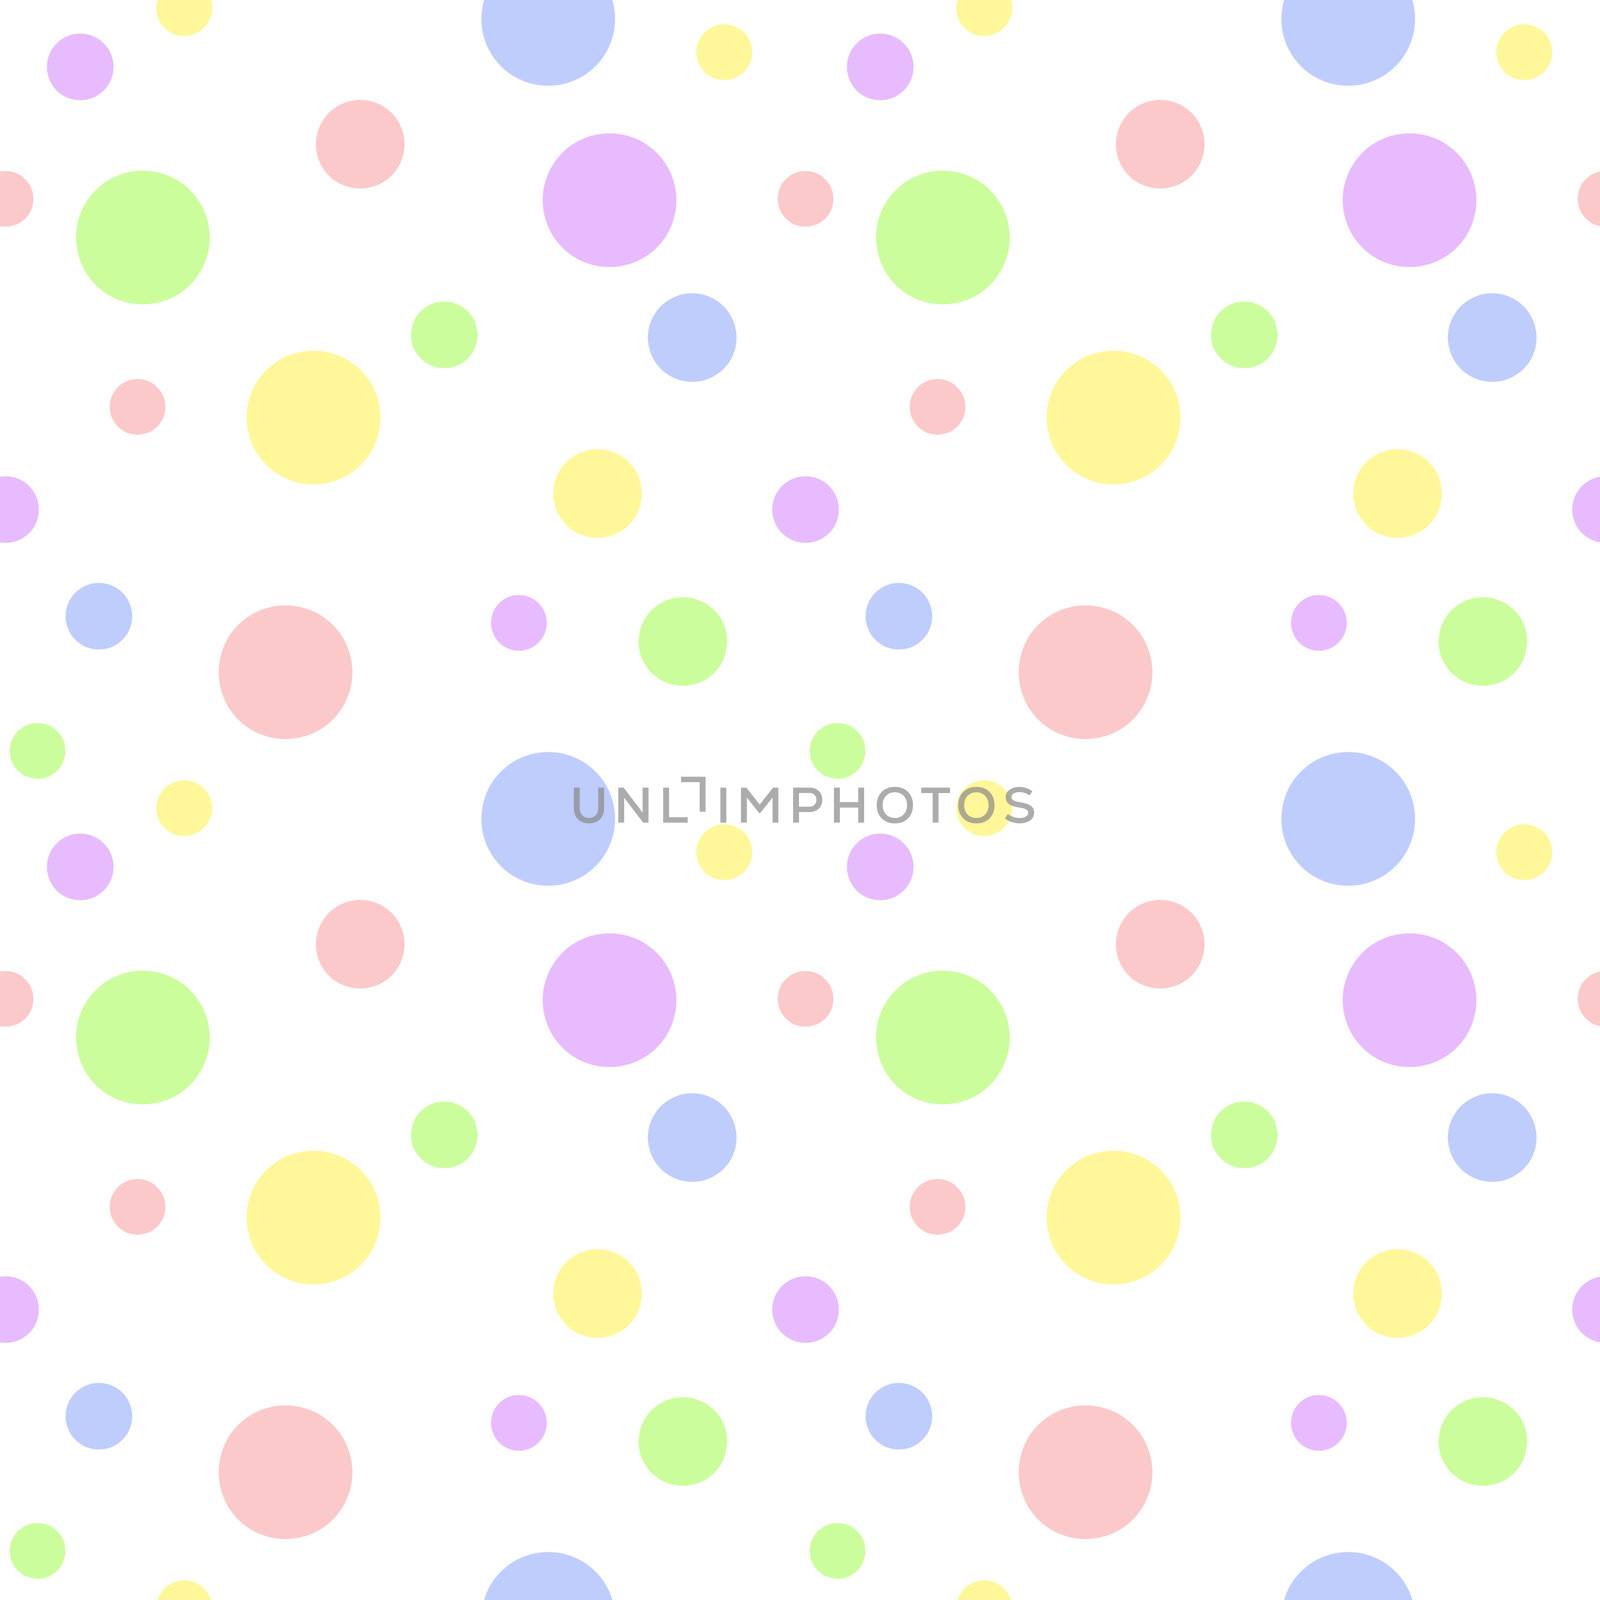 Seamless pattern of soft baby pastel color polka dots in various sizes on white background